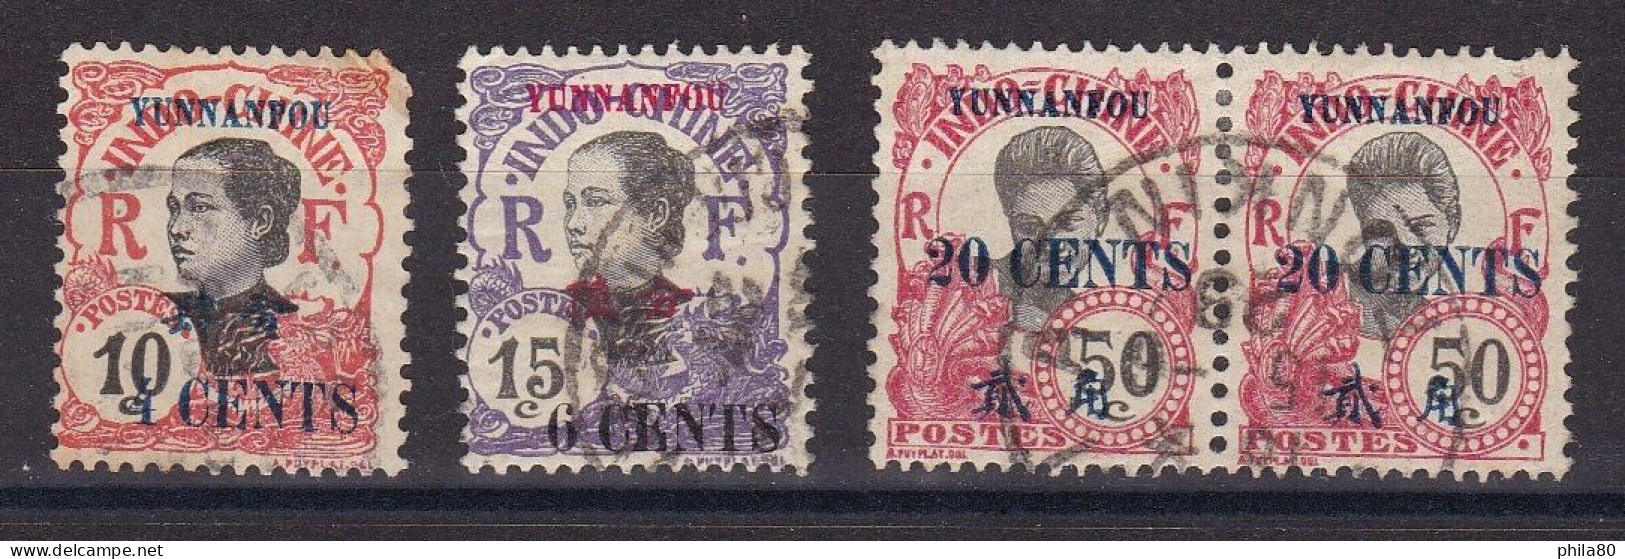 YUNNANFOU N°54, 55, 61X2 - Used Stamps